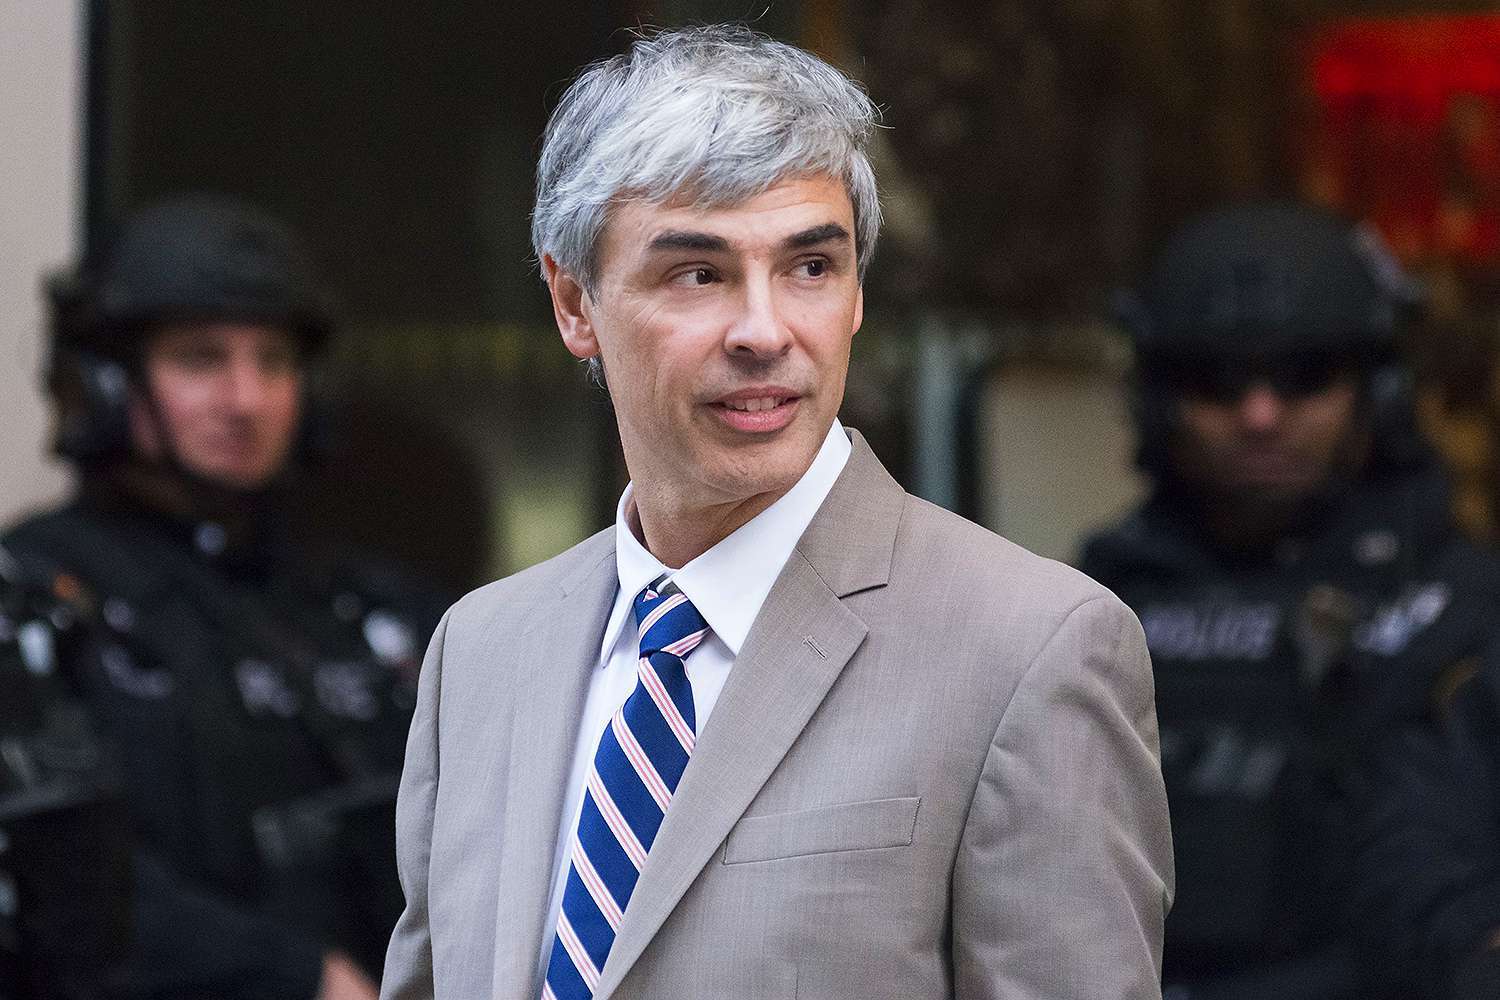 Larry Page Biography: Age, Net Worth, Wikipedia, Wife, House, Children, Siblings